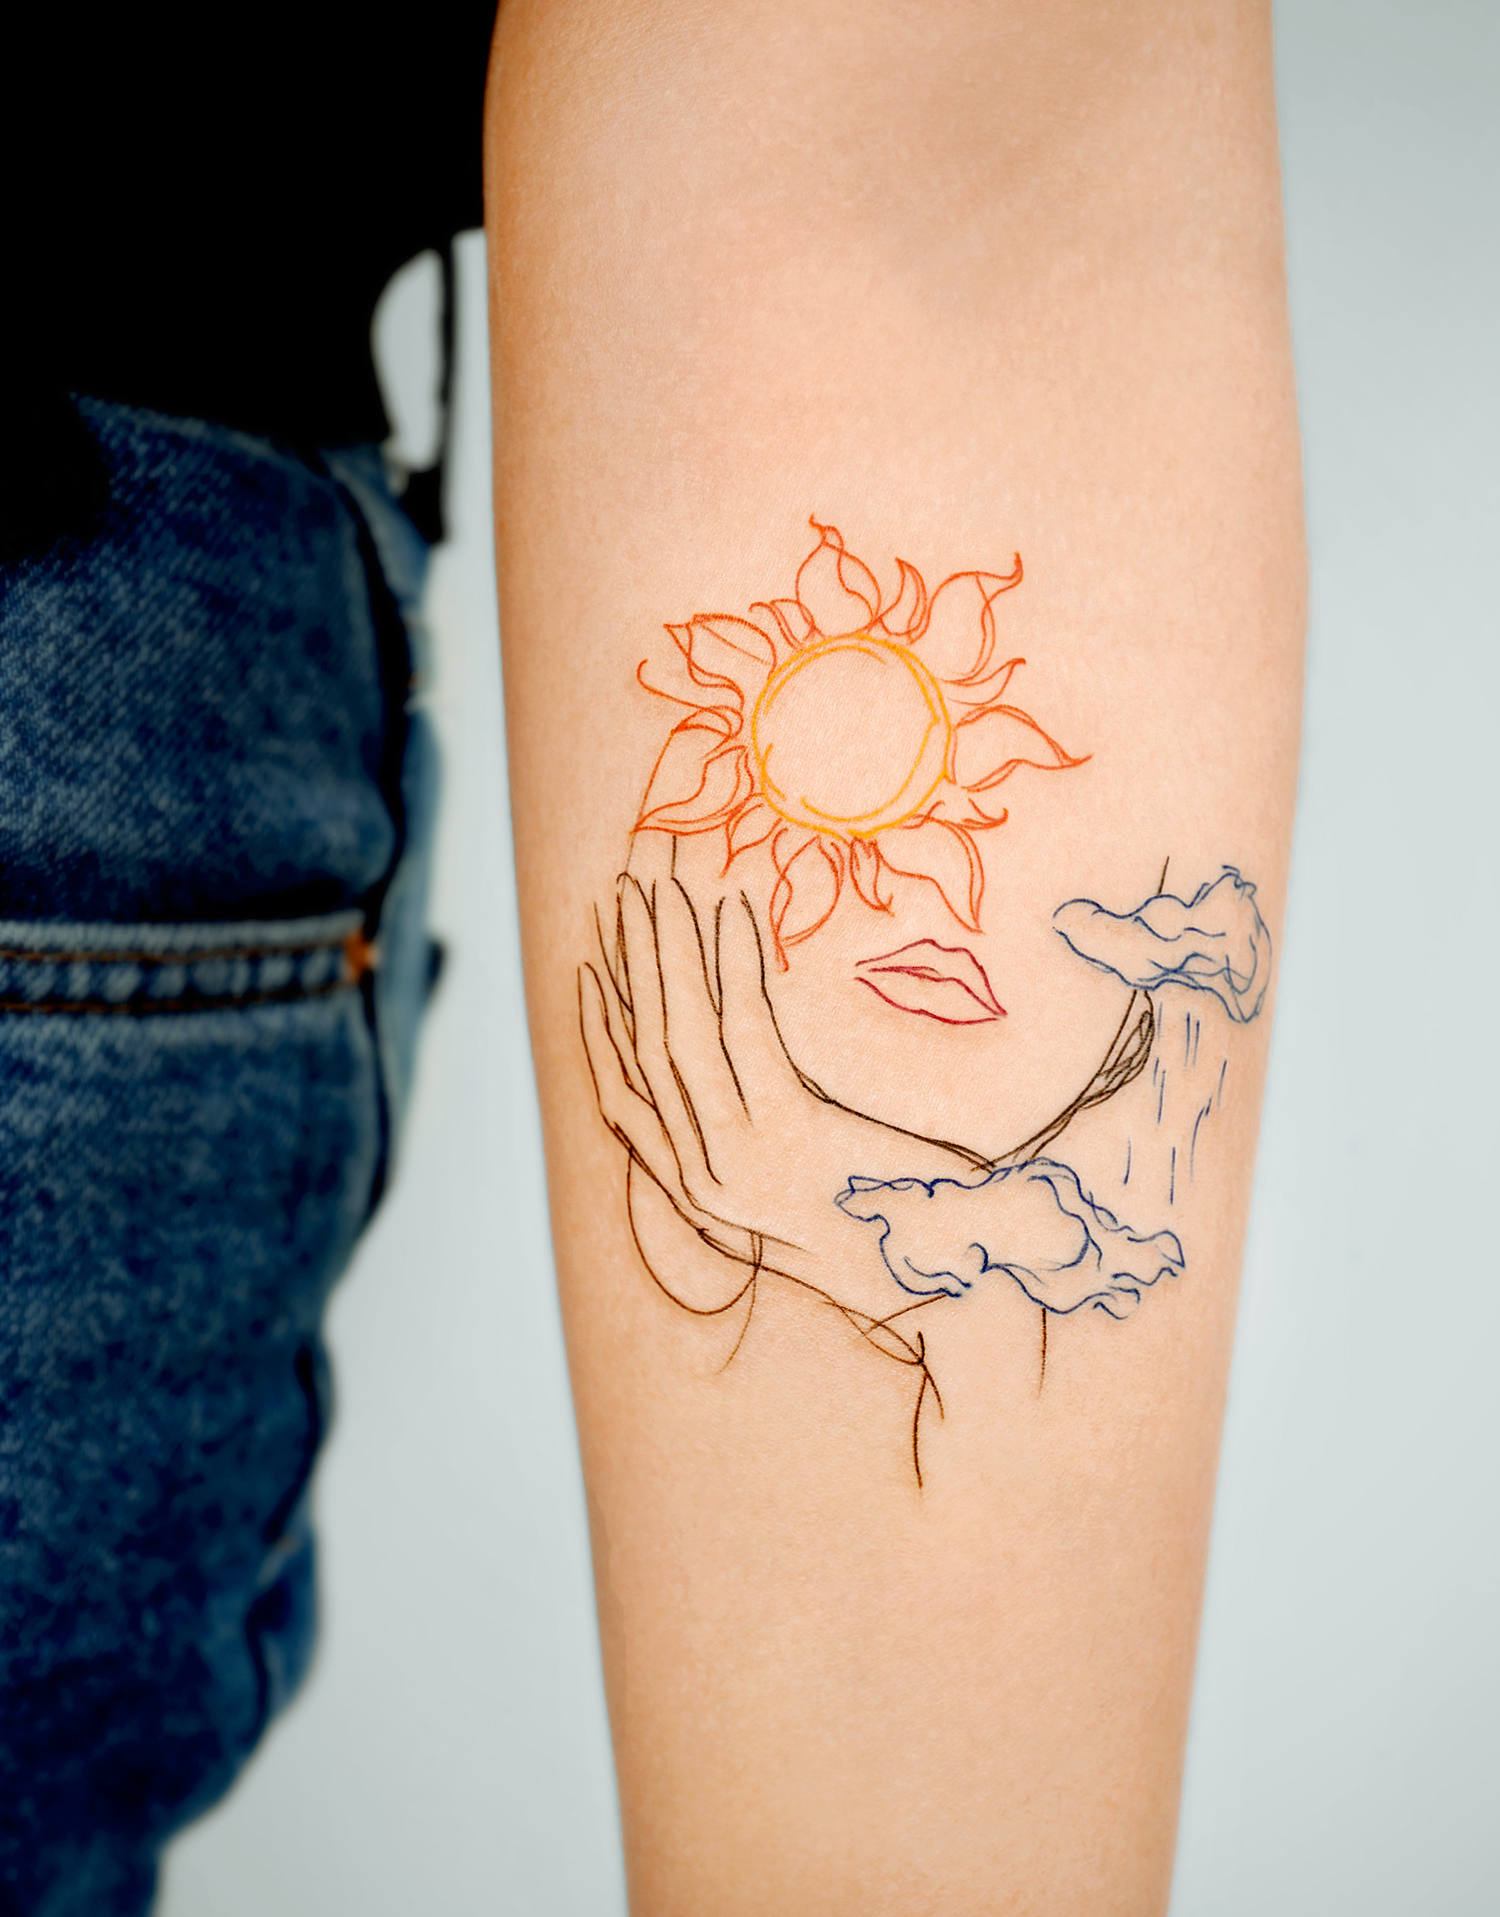 Additionally, the artist integrates color in his fine-line tattoos.